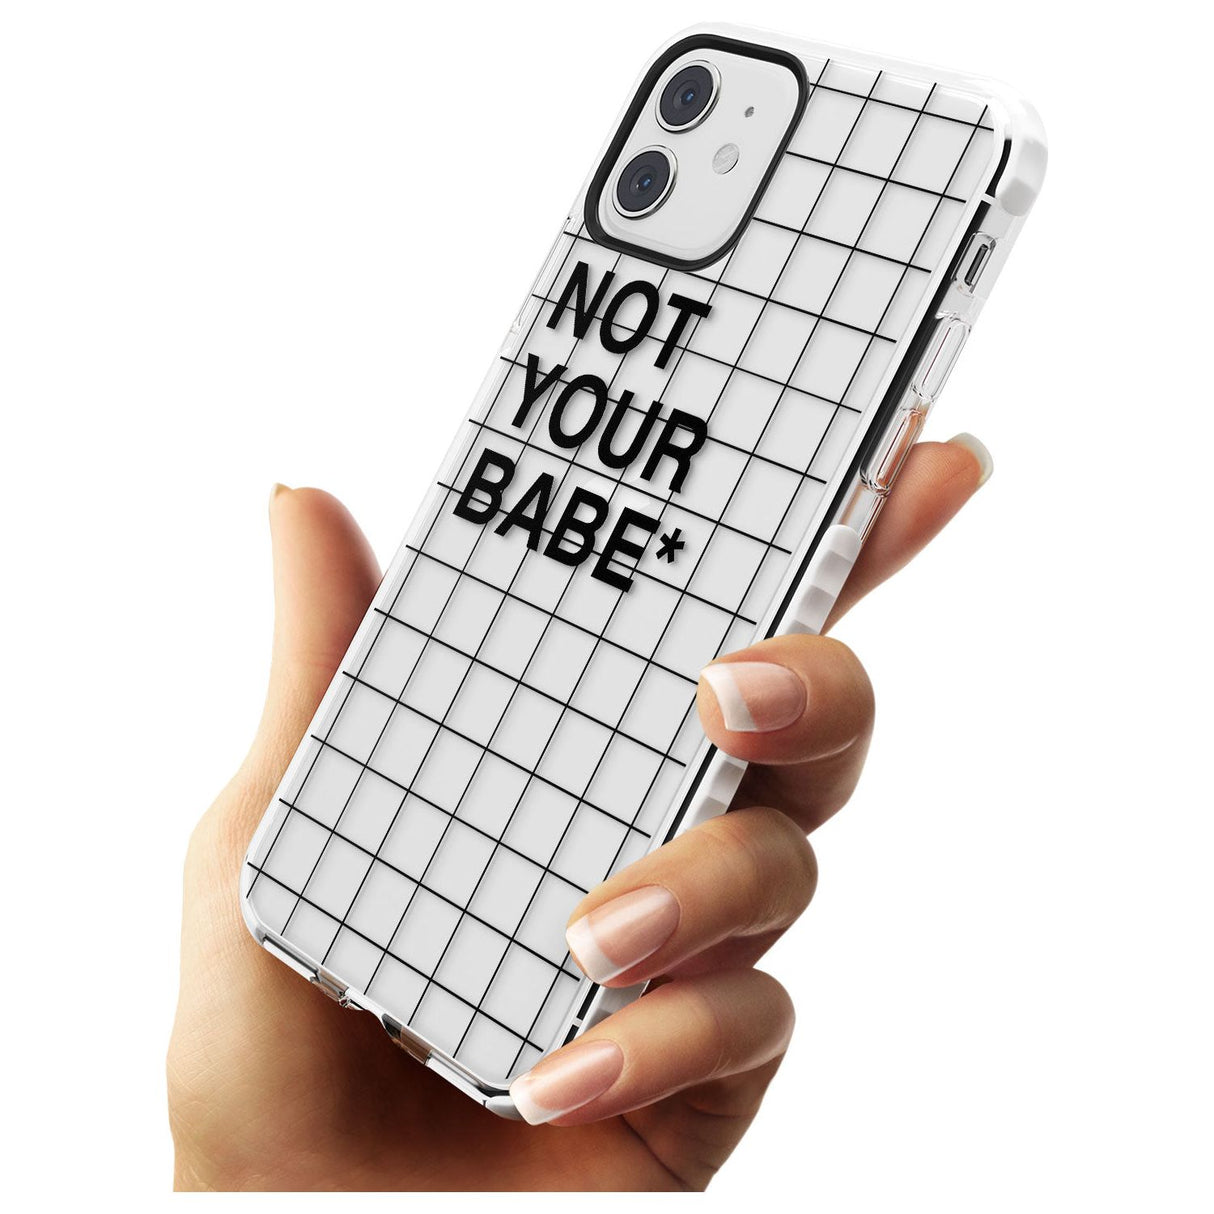 Grid Pattern Not Your Babe Impact Phone Case for iPhone 11